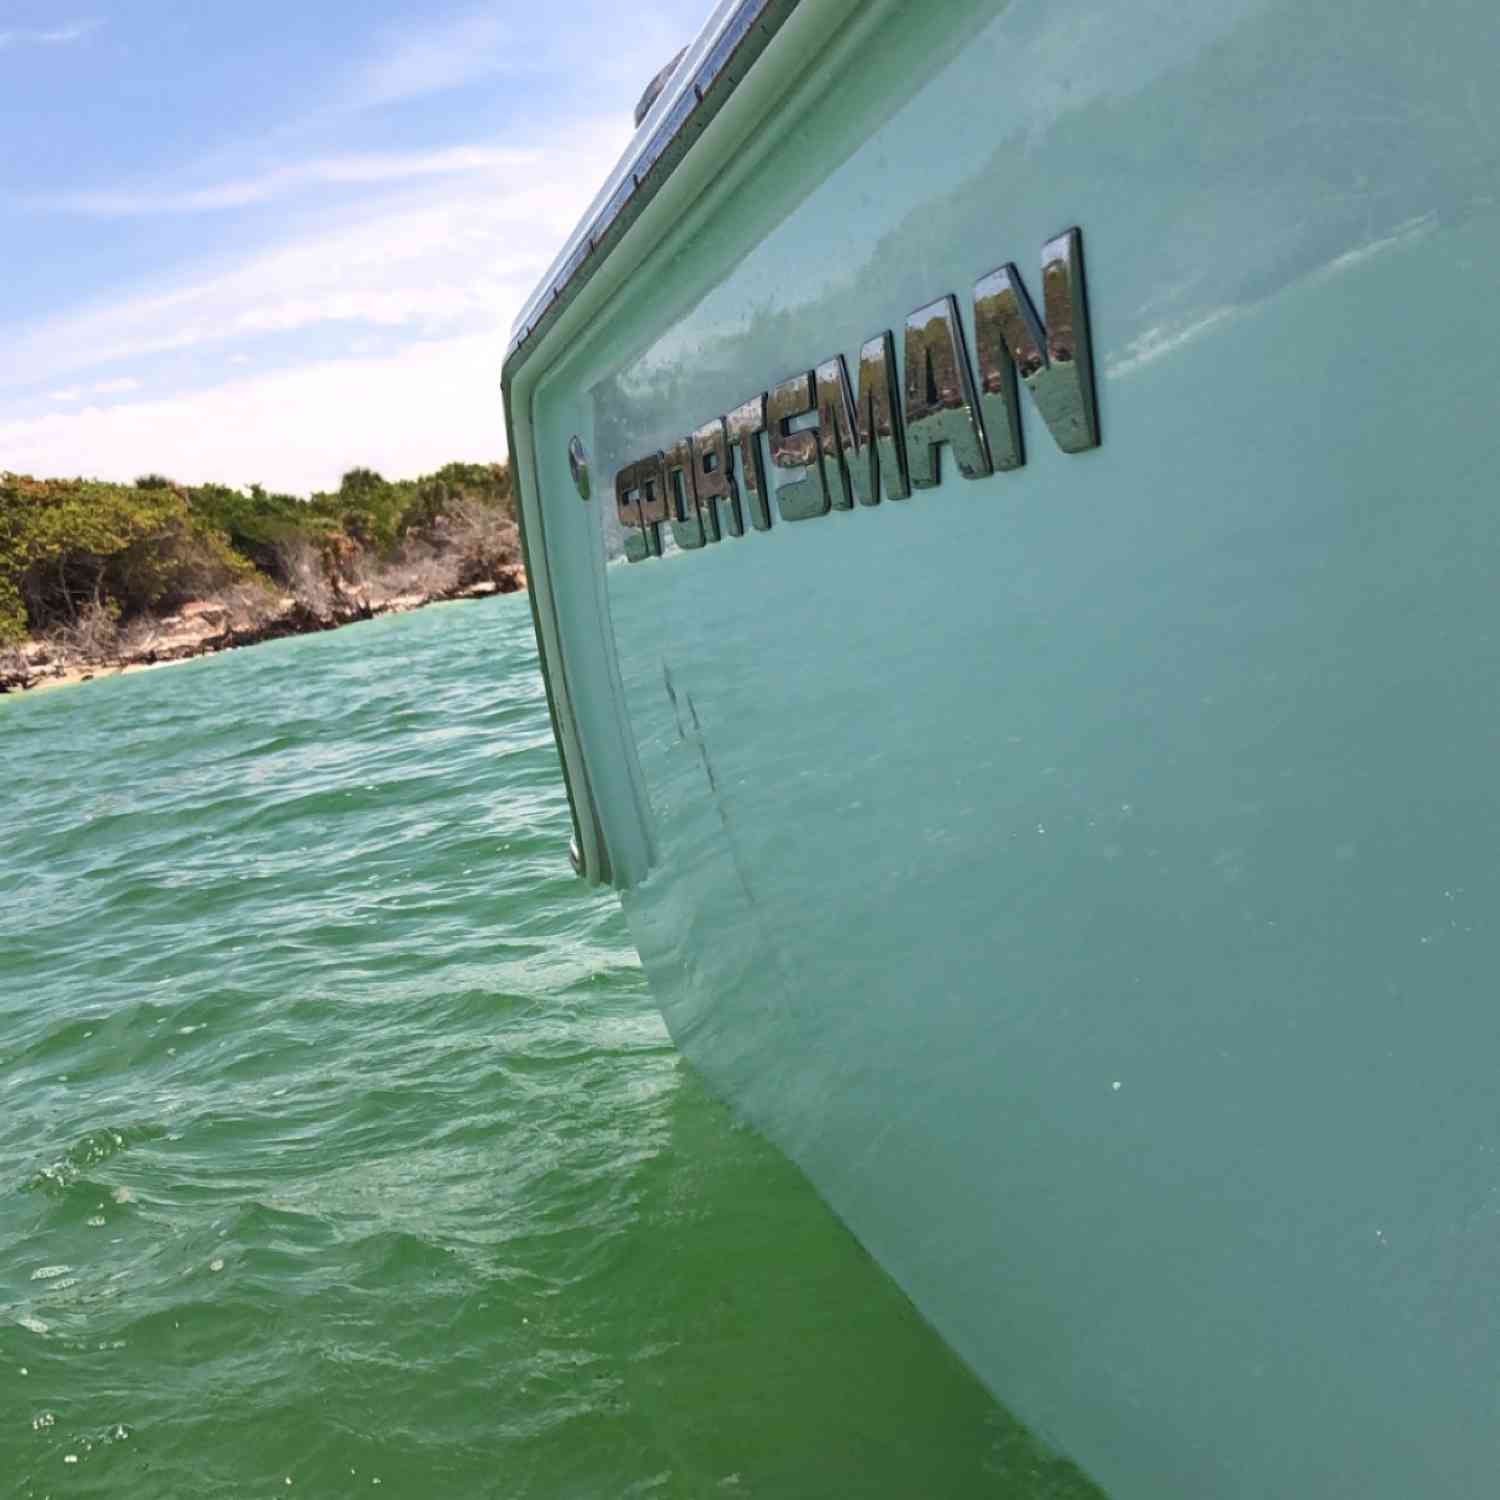 A view of the sportsman branding on the side of the boat.